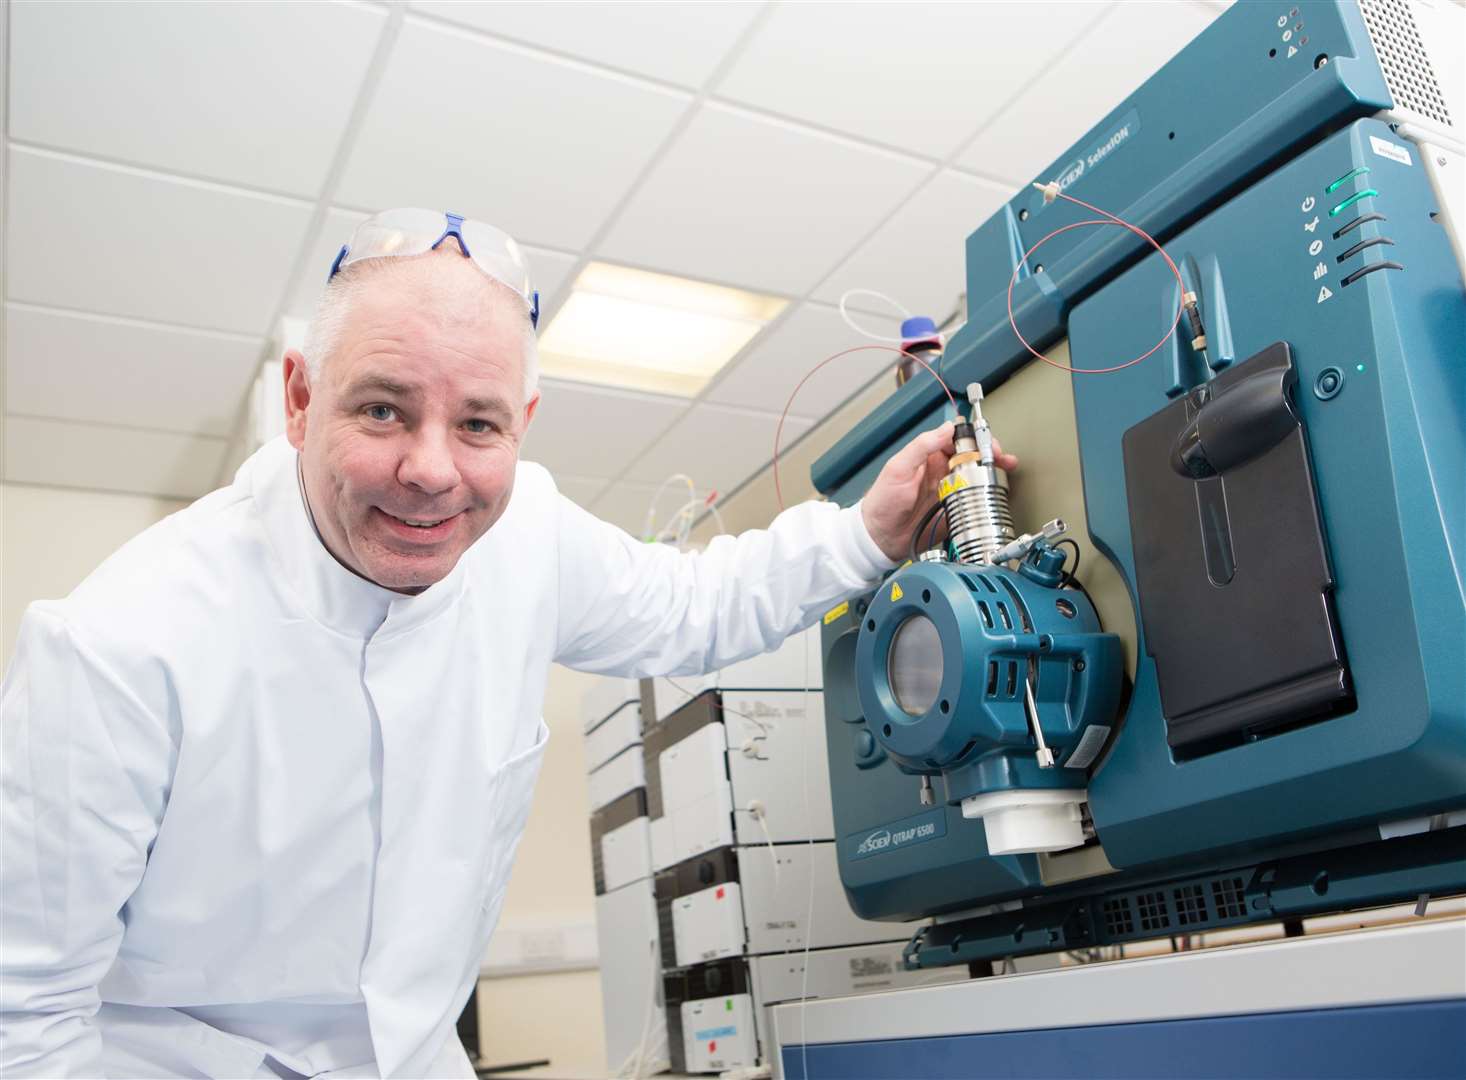 Professor Phil Whitfield is delighted the university can use its expertise and equipment to support a local company.